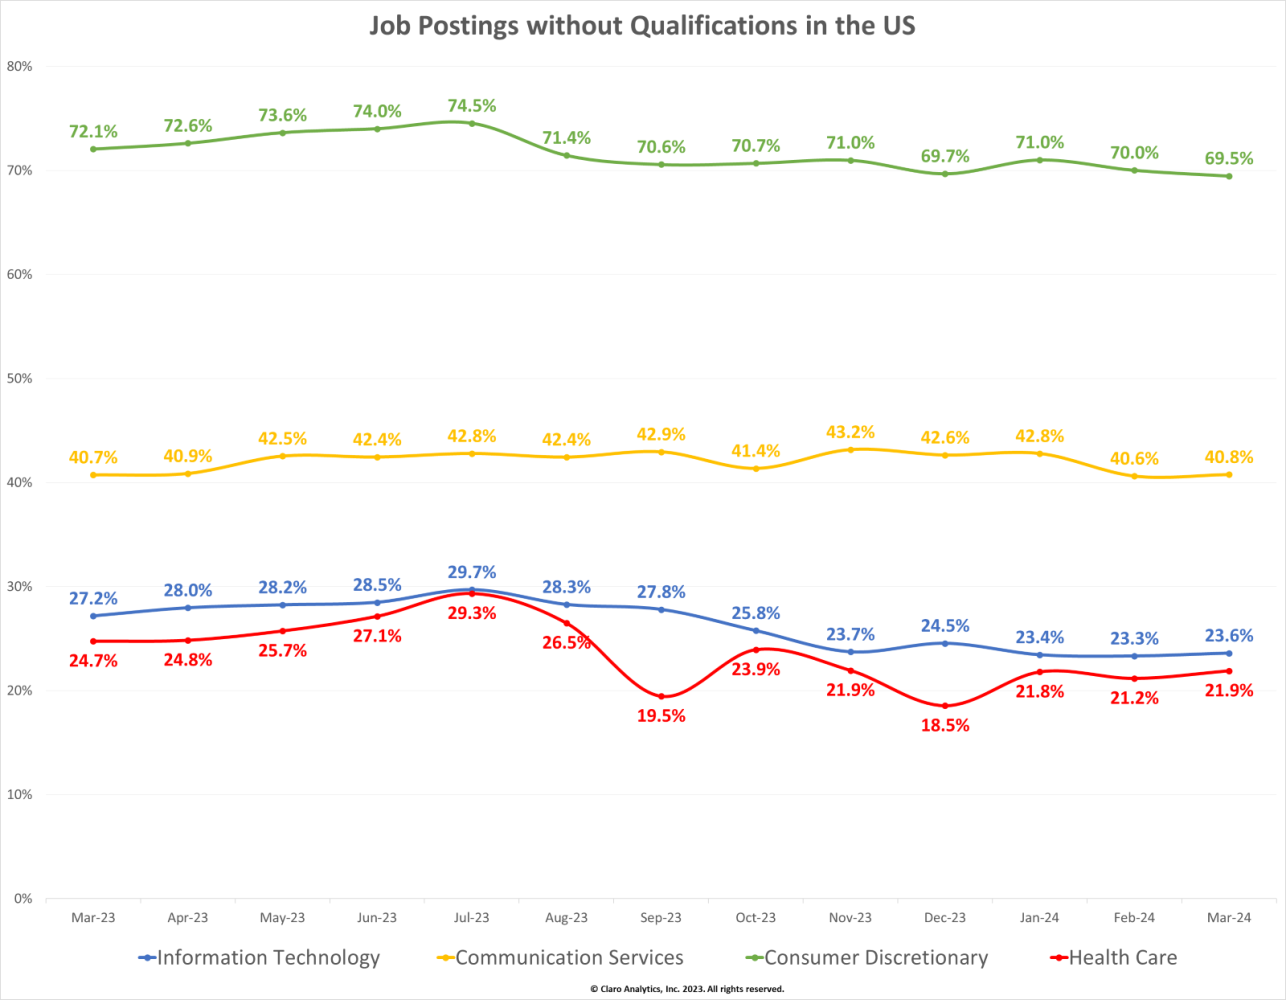 Claro graph on job postings without qualifications in the US